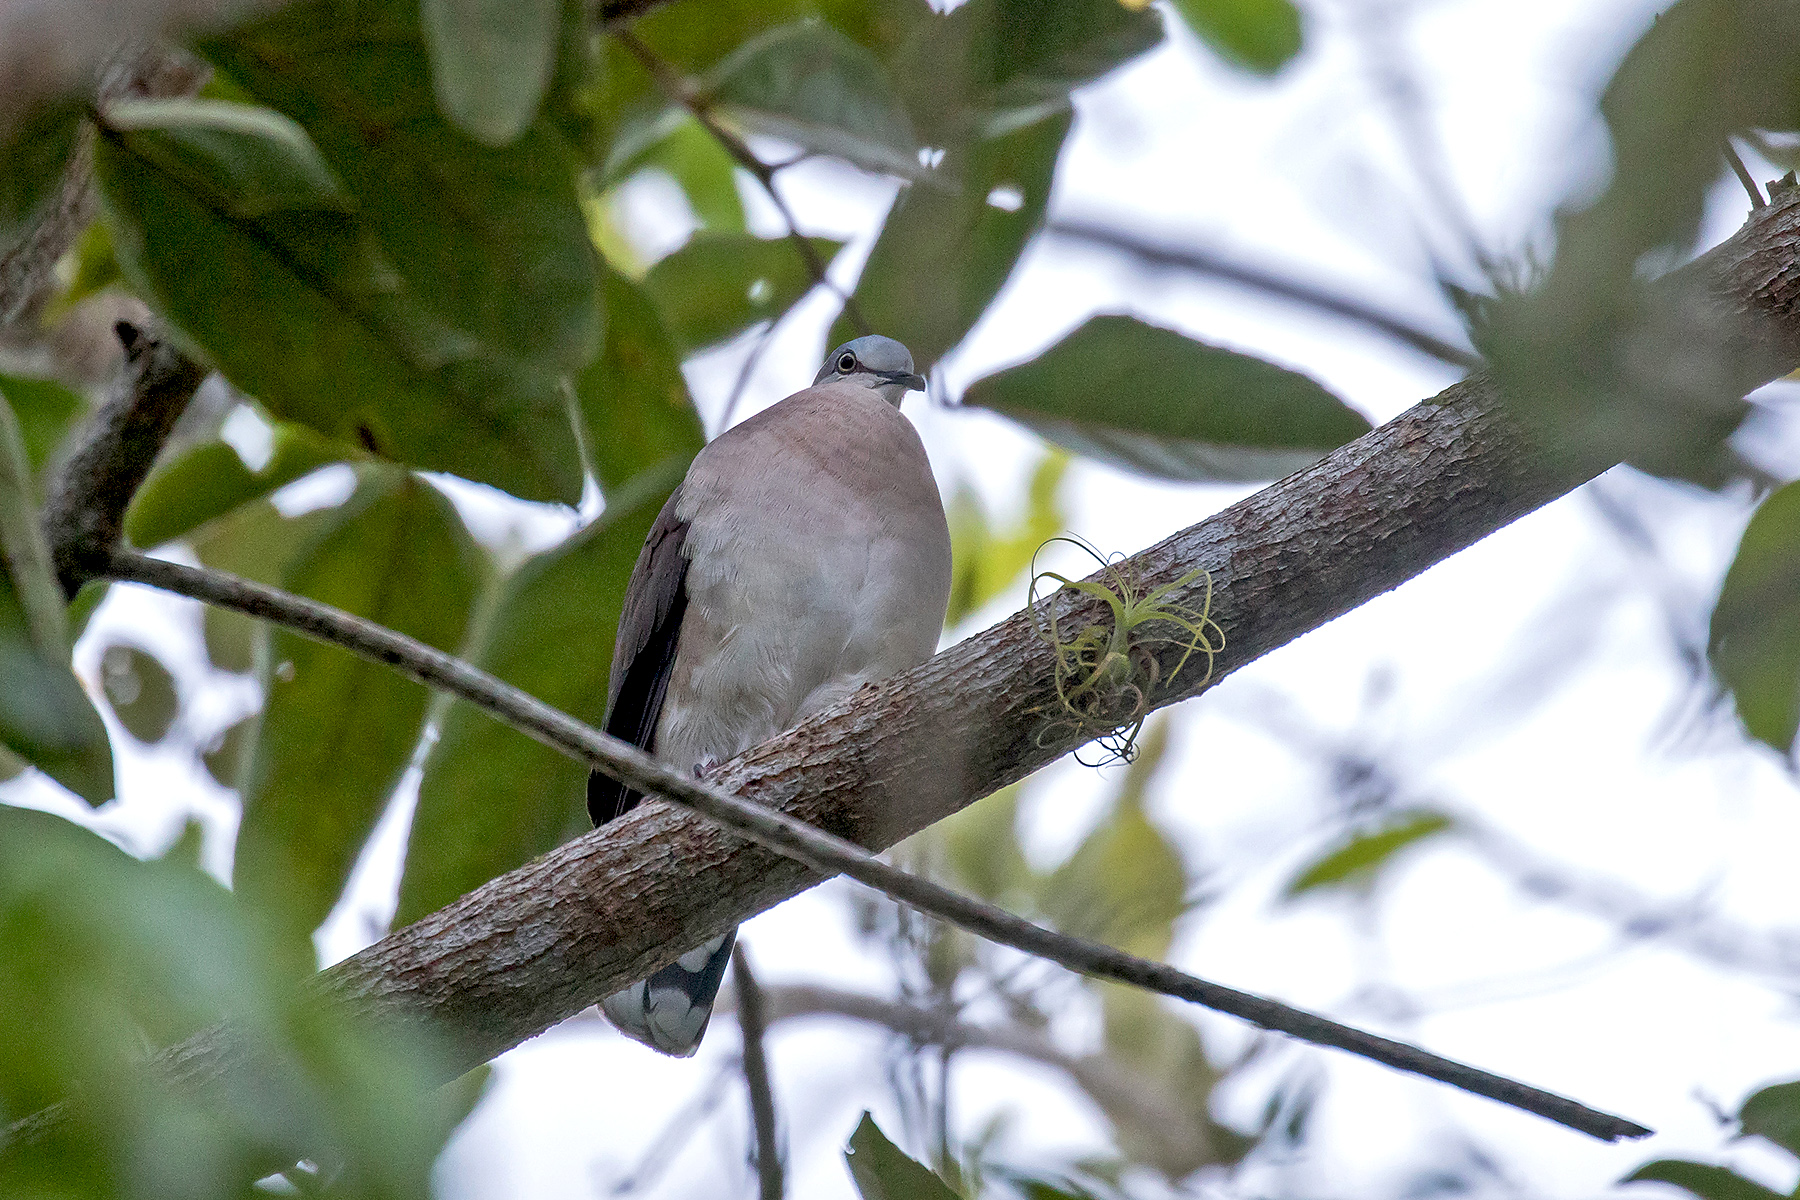 Grey-headed Dove on our Costa Rica birding tour (image by Pete Morris)